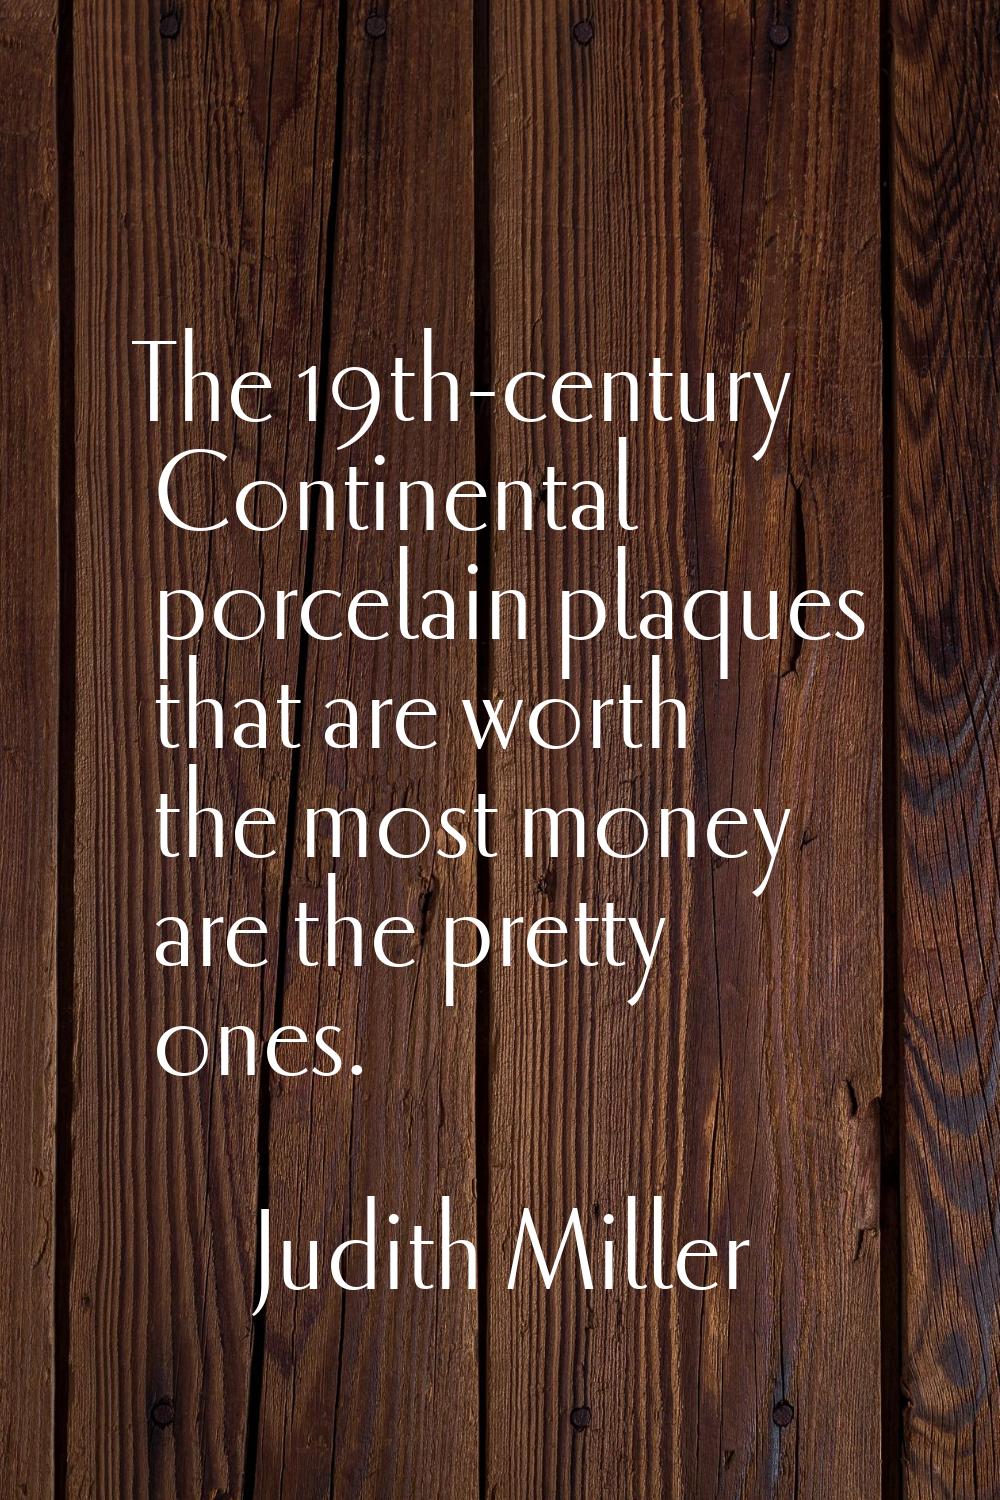 The 19th-century Continental porcelain plaques that are worth the most money are the pretty ones.